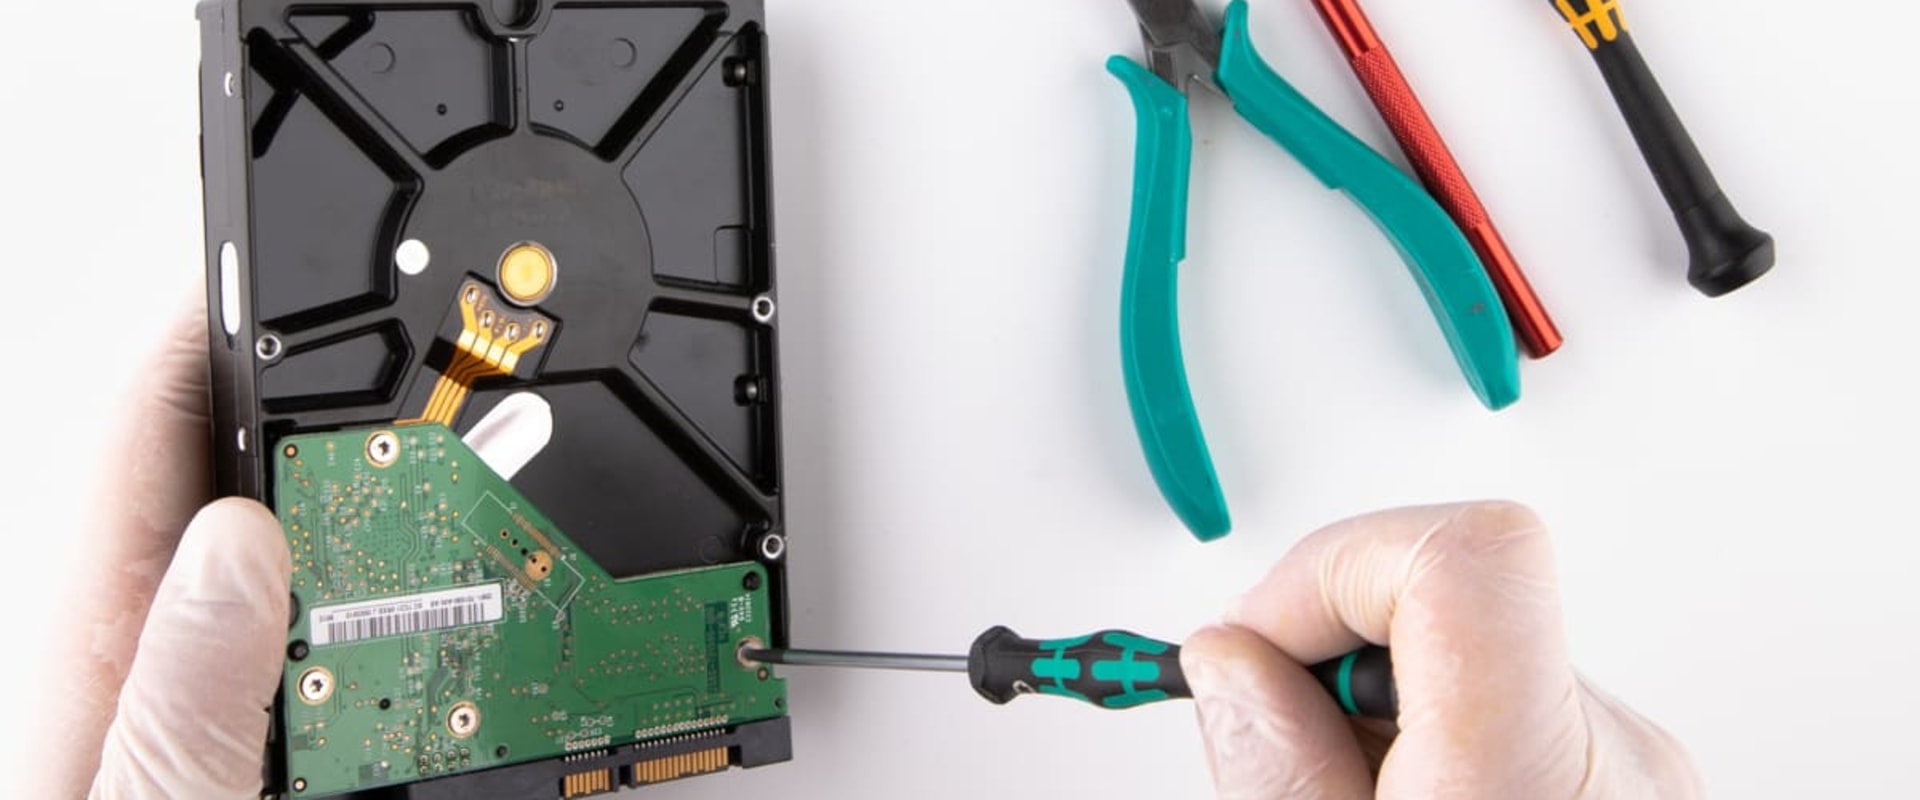 Data Recovery Services in Glendale, California: Find the Best Option